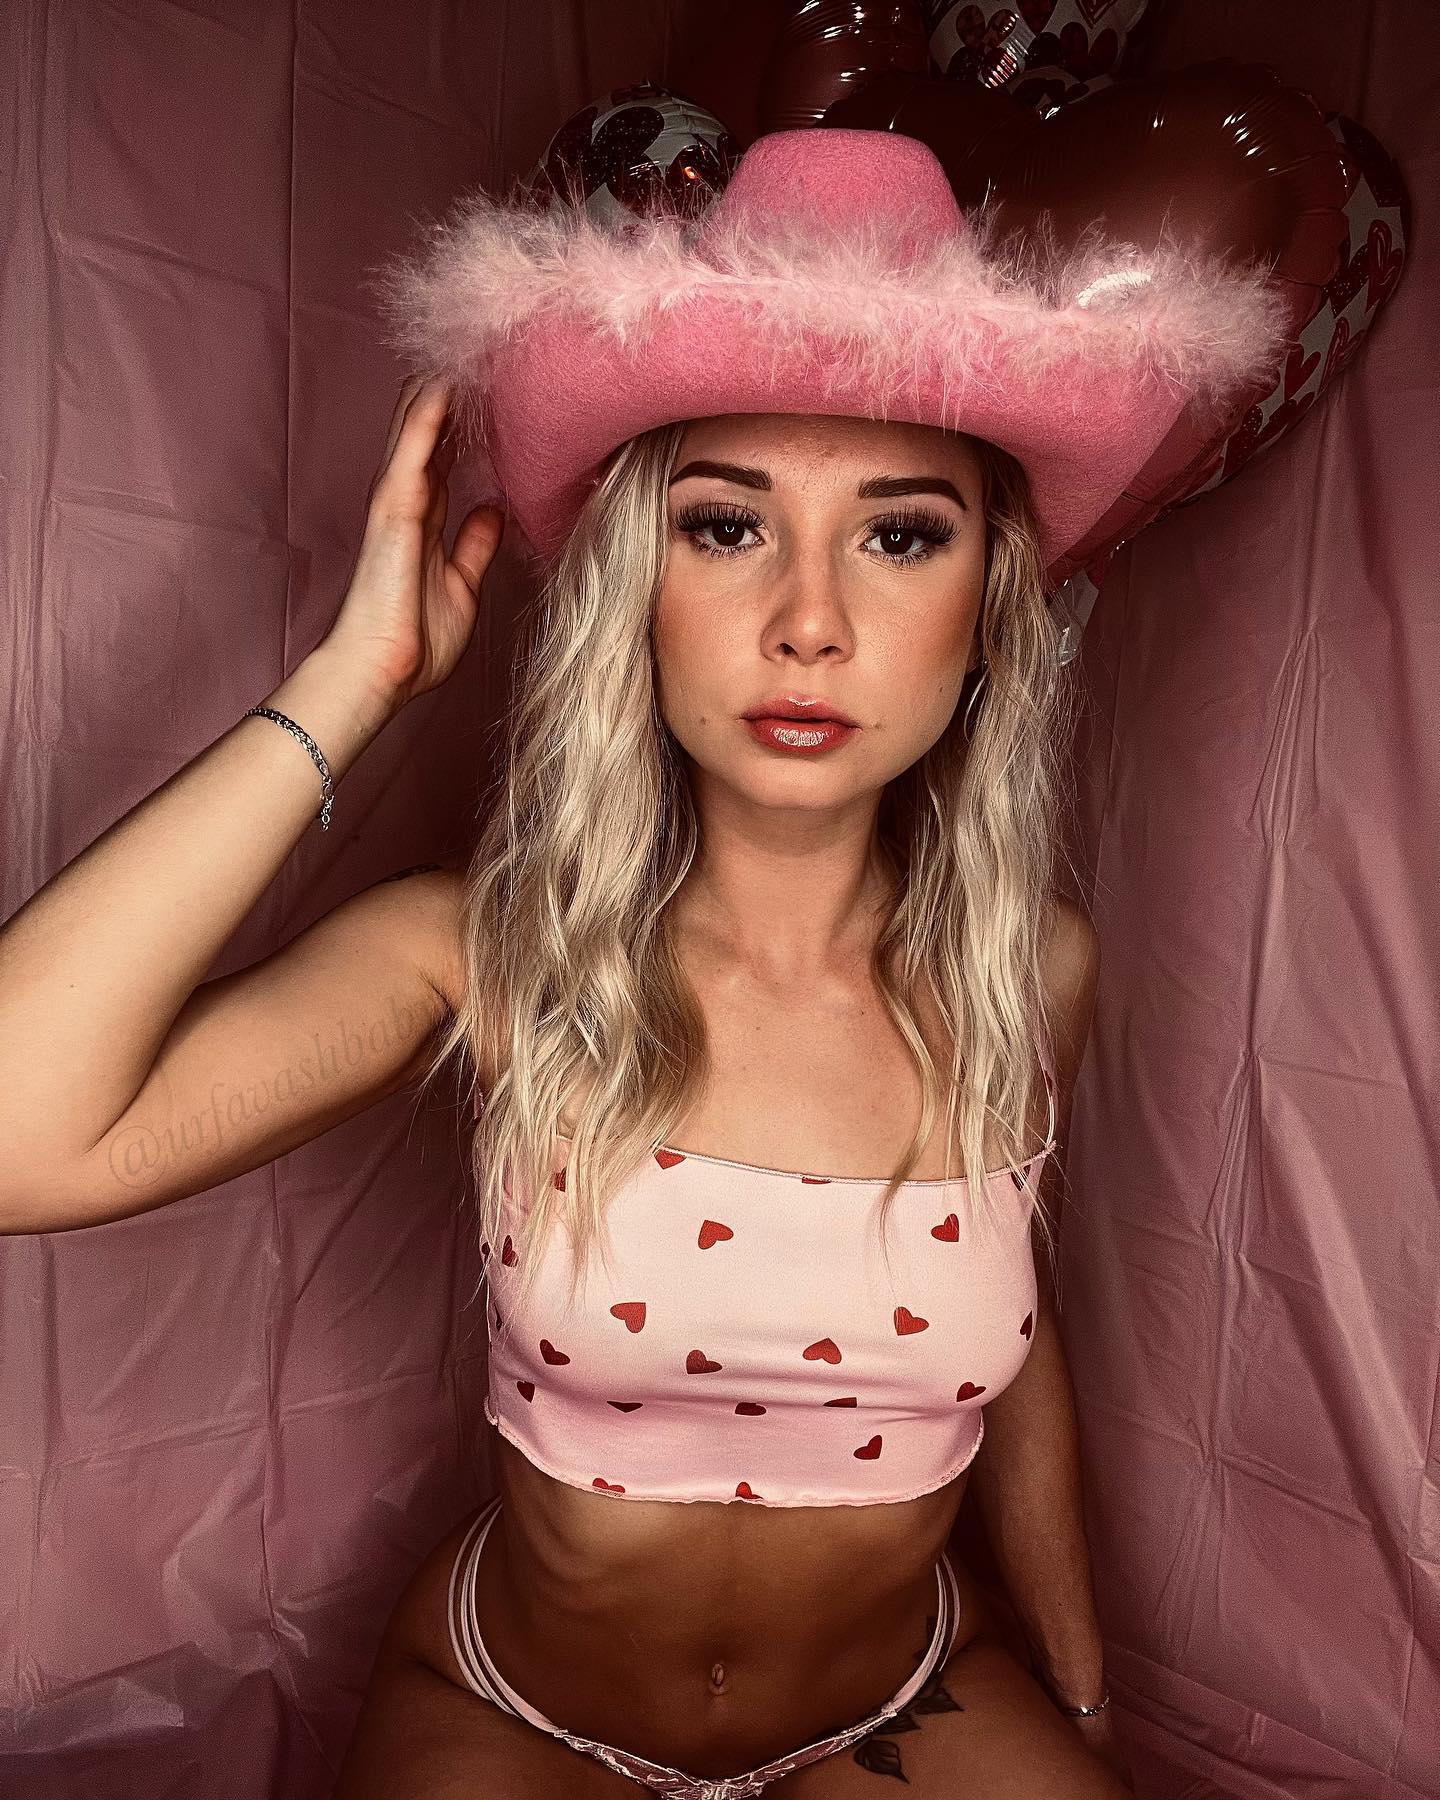 Can you guess my favorite color?🤭
.
.
.
.
.
.
.
#pinkpinkpink #pinkcowgirl #ashbaby #photoshoot #photooftheday #pinkaesthetic #camgirl💘